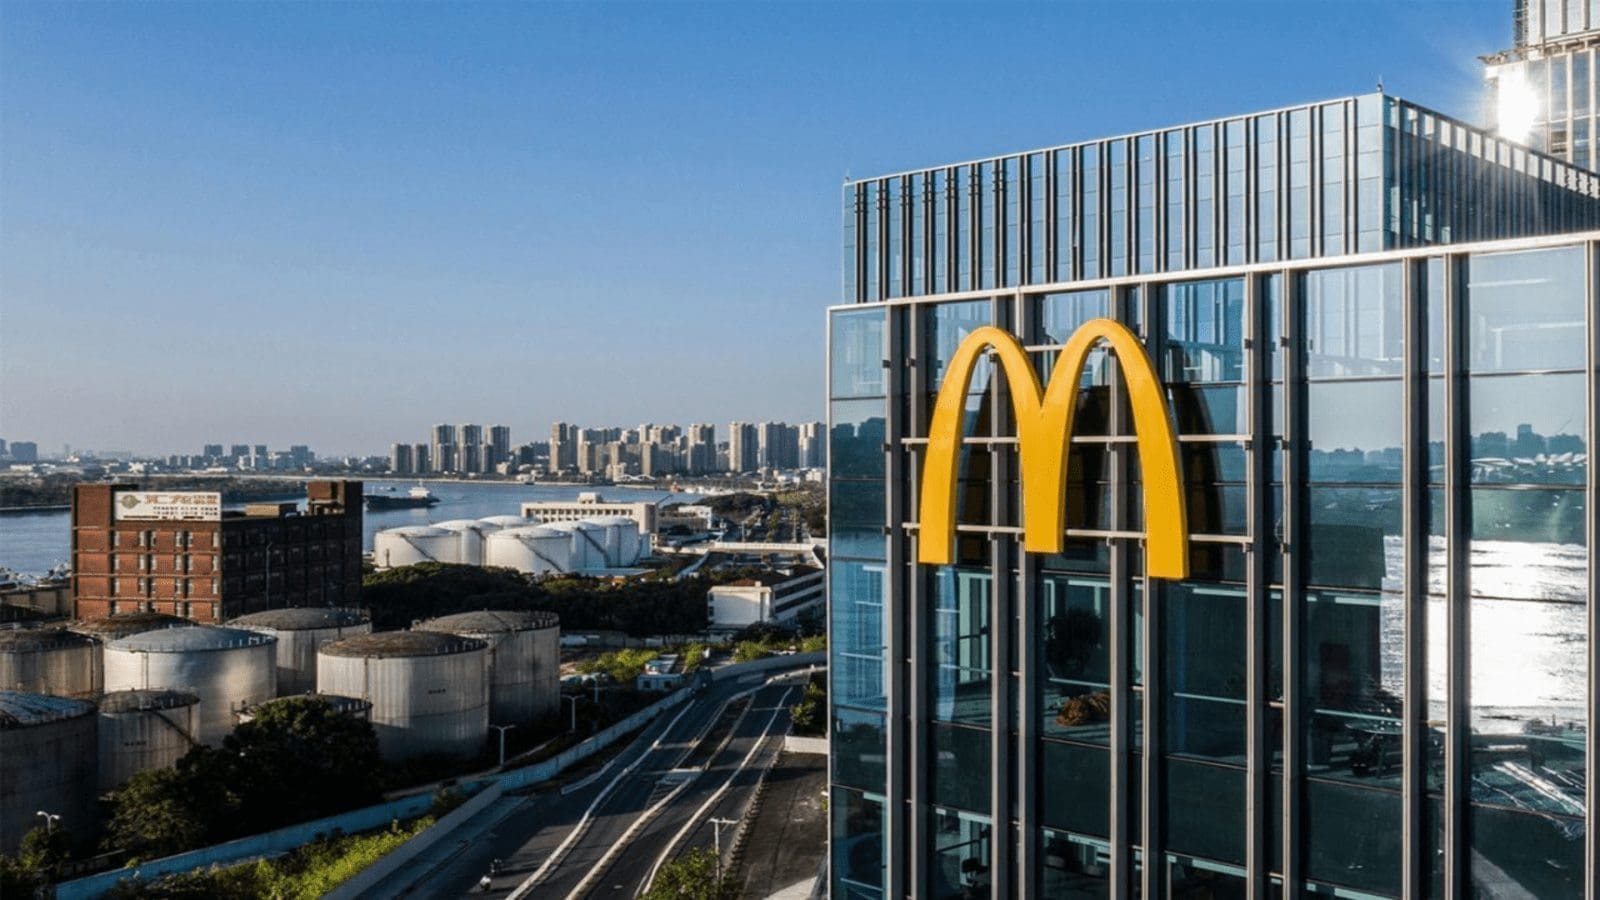 McDonald’s reports impressive Q3 results with strong sales growth and new menu success